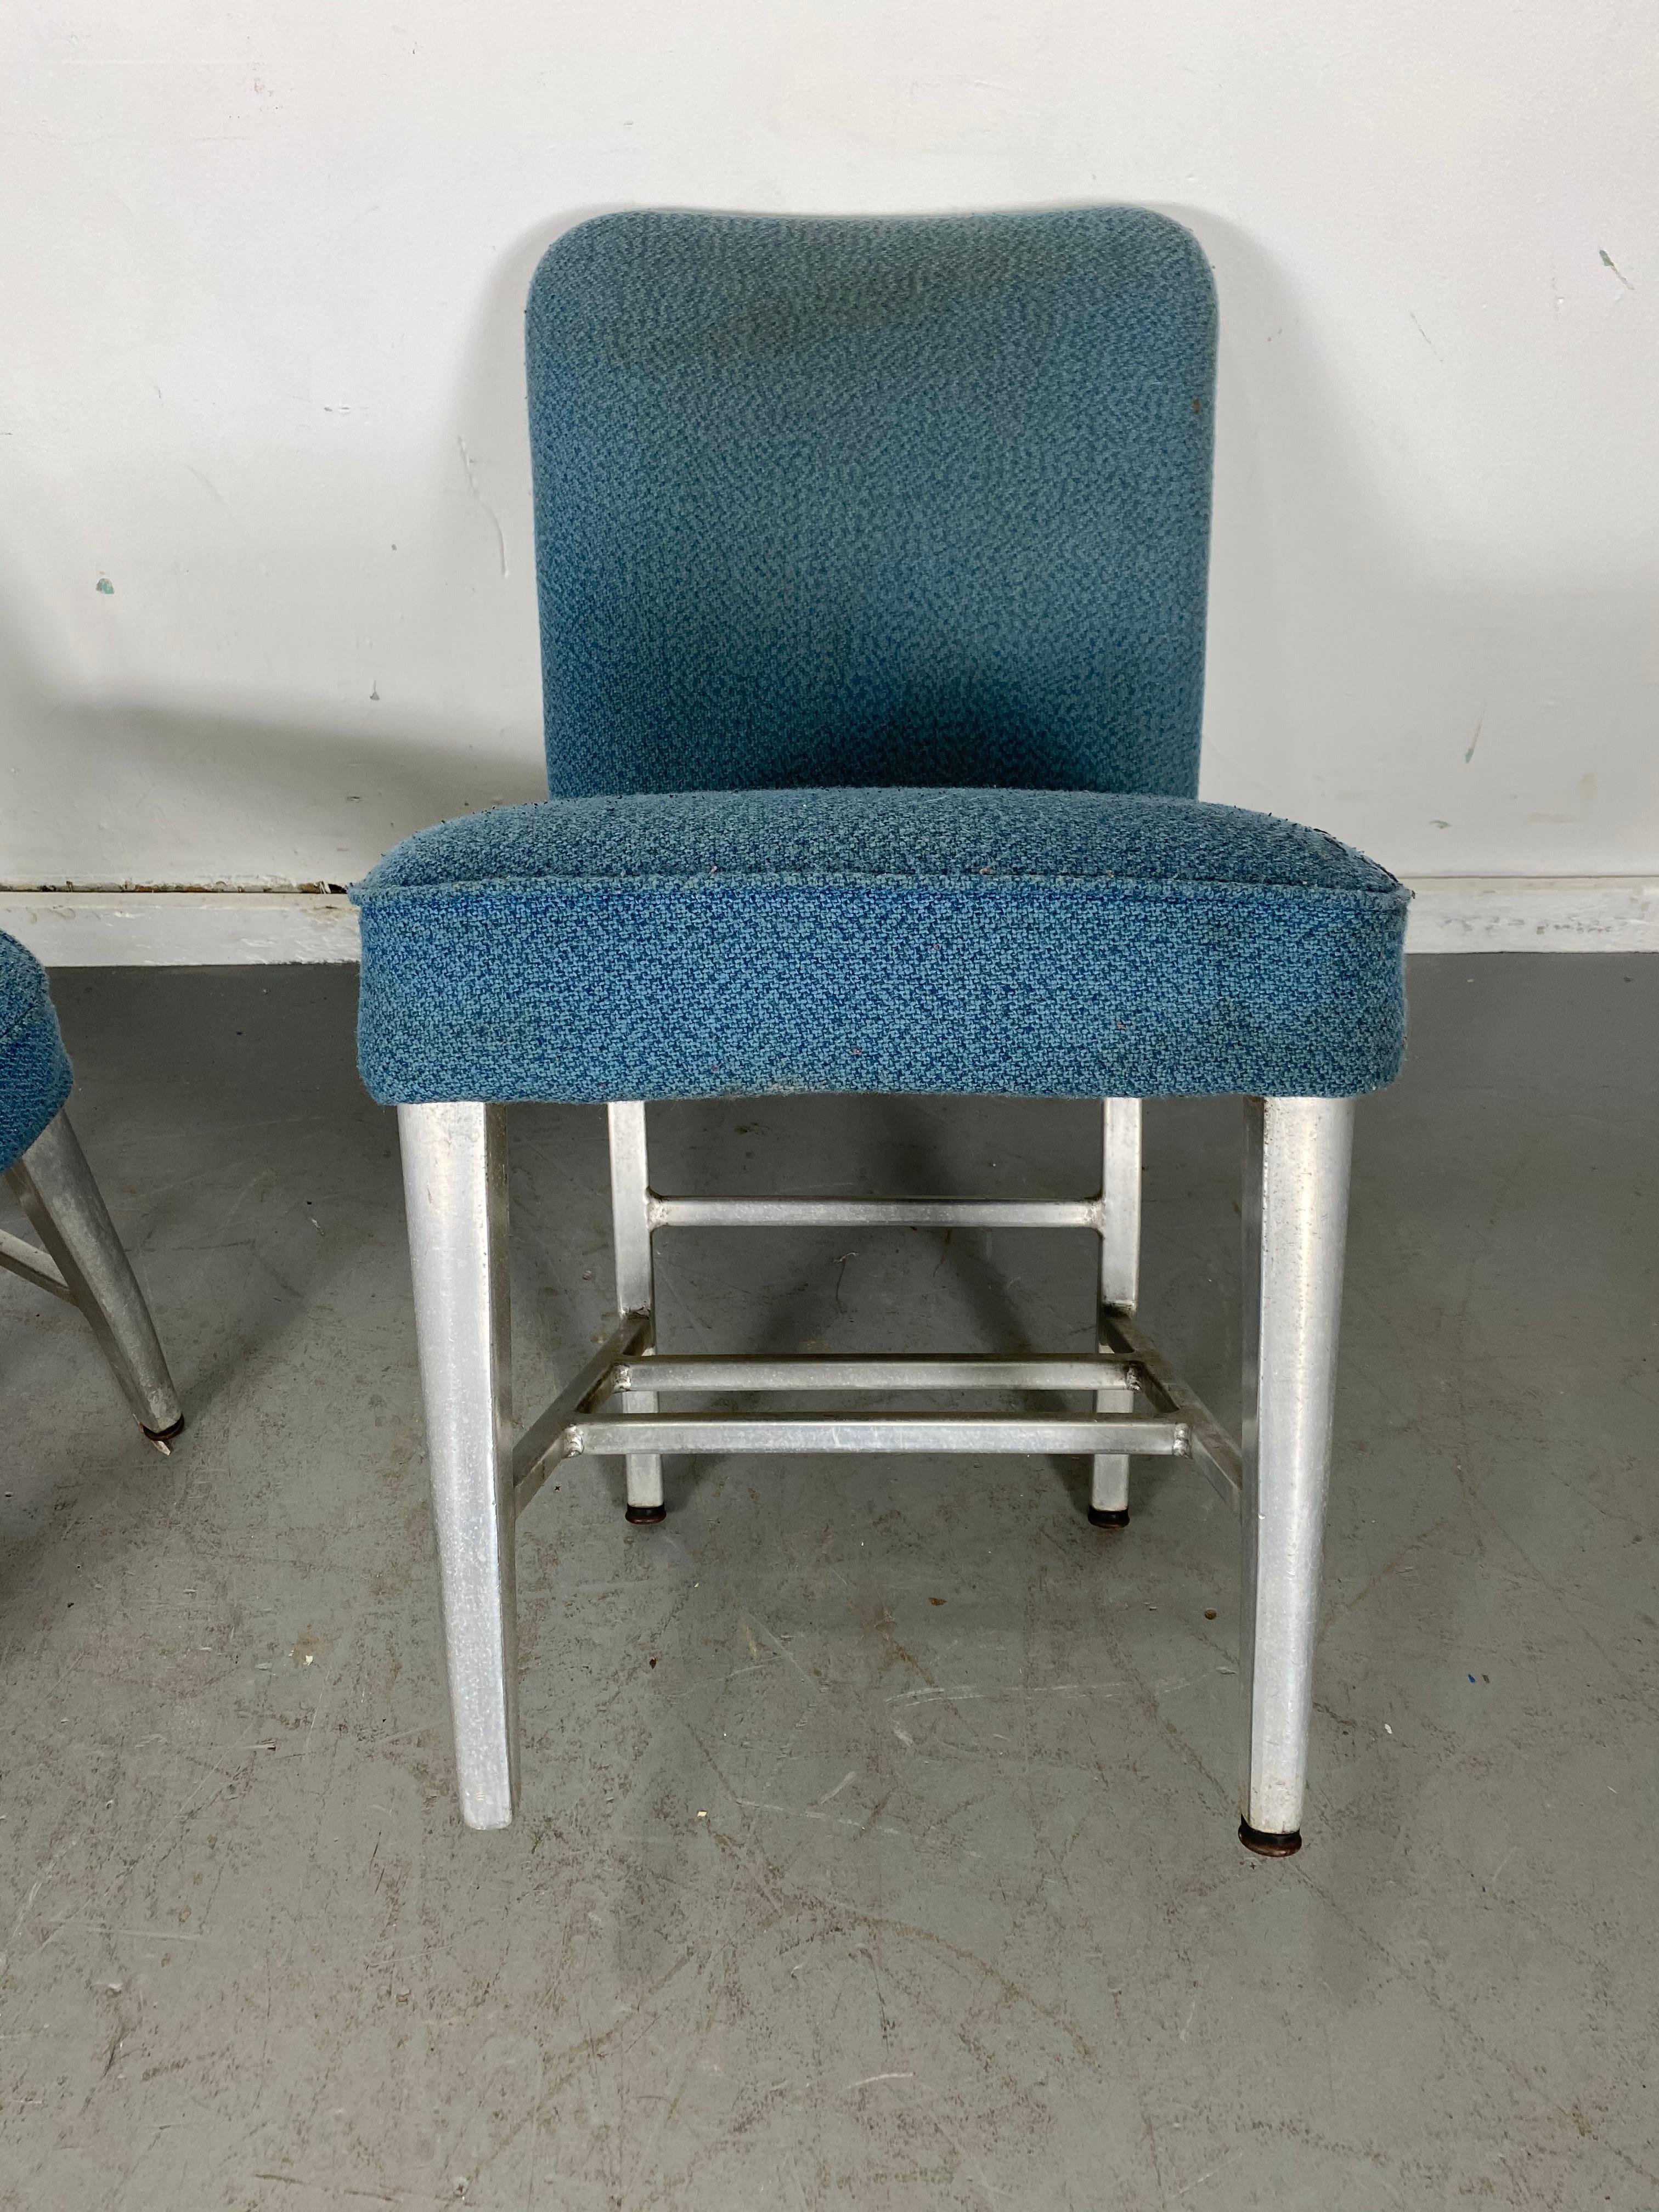 Art Deco Pullman Dining Car Chairs, Aluminum and Fabric, Attributed to Emeco For Sale 1